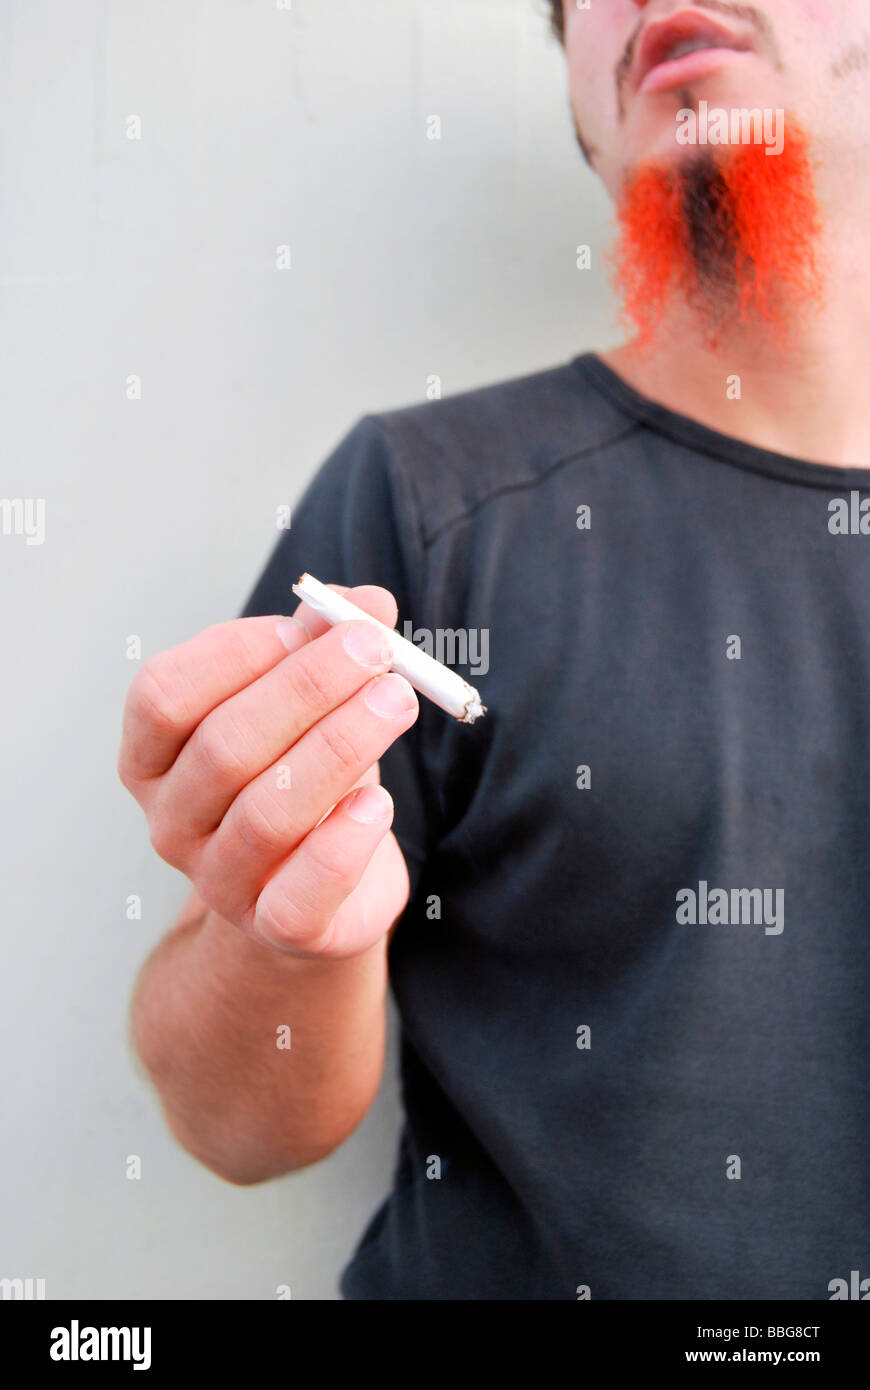 Smoking weed, young man with red-black beard holding a joint, hand-rolled cigarette Stock Photo